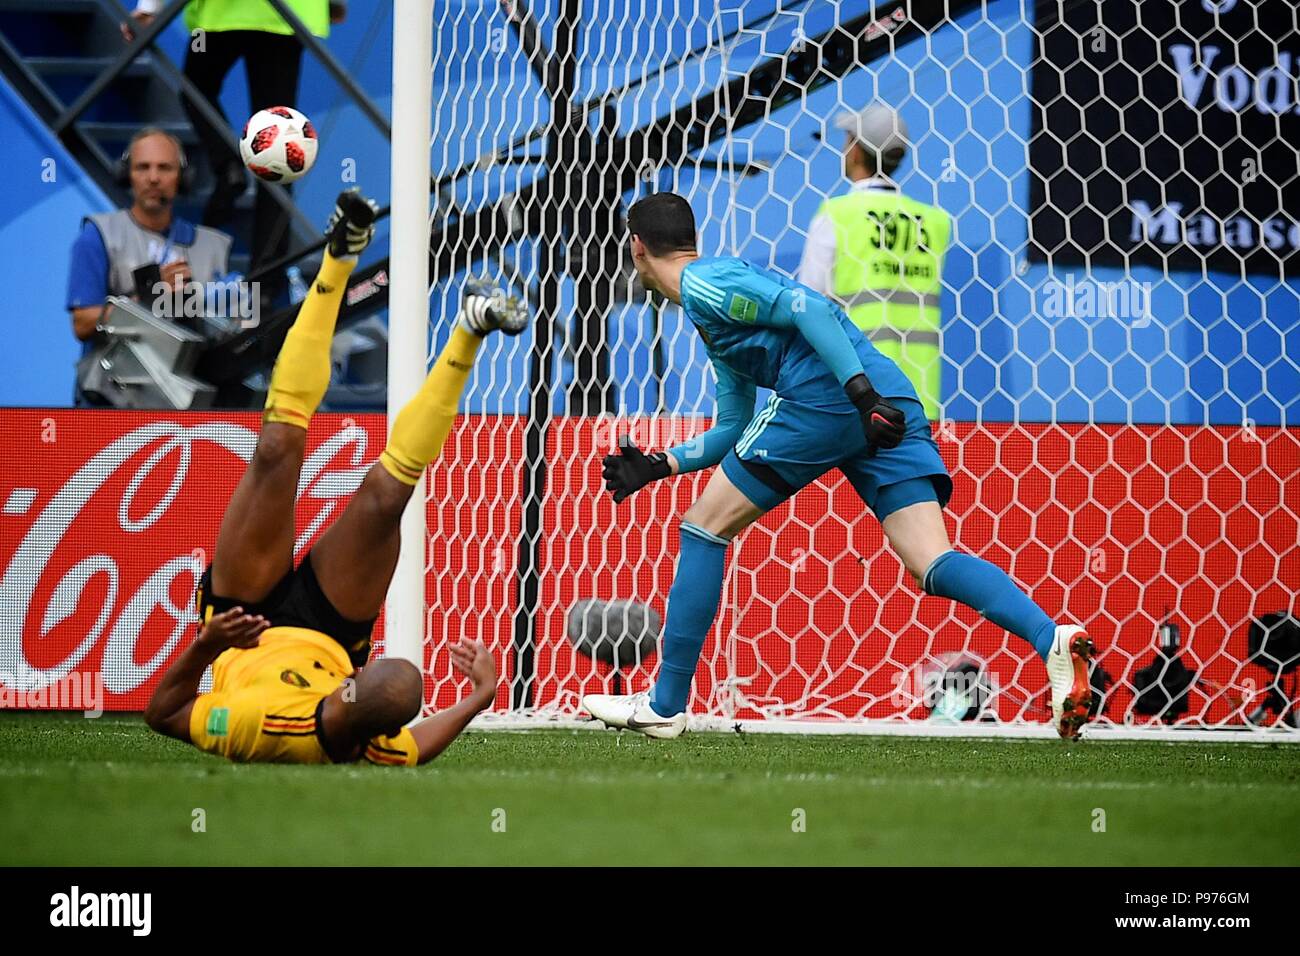 July 14th, 2018, St Petersburg, Russia. Thilaut Courtois and Vincent Kompany of Belgium in action during the 2018 FIFA World Cup Russia match between England and Belgium at Saint-Petersburg Stadium, Russia. Shoja Lak/Alamy Live News Stock Photo